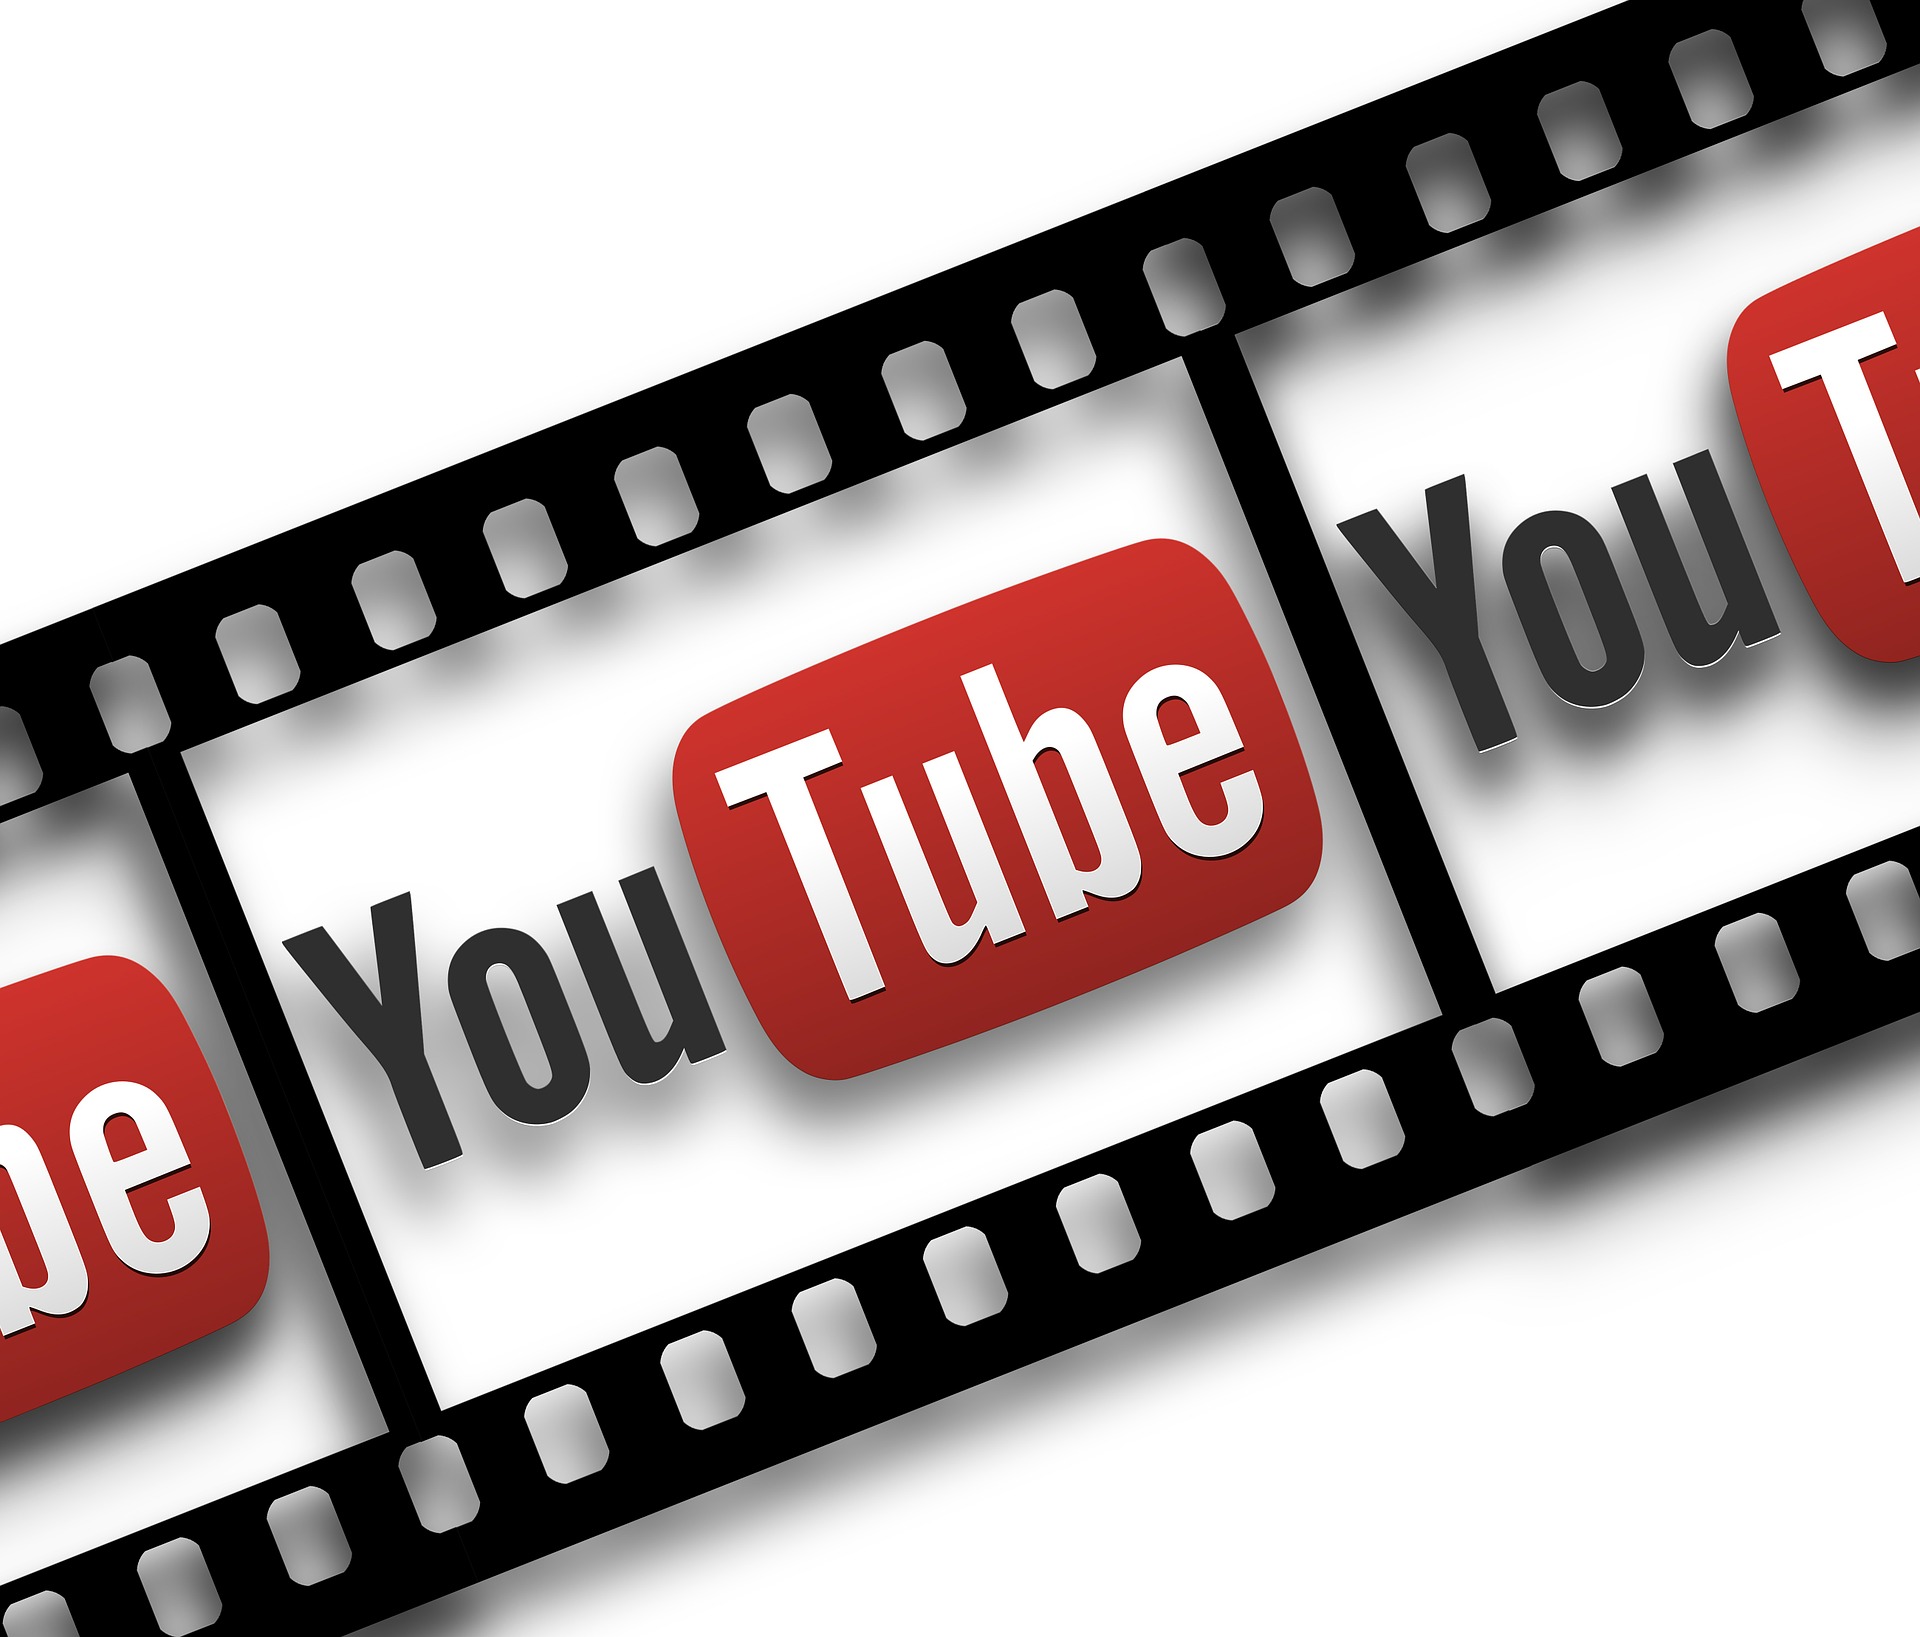 How to unblock YouTube videos